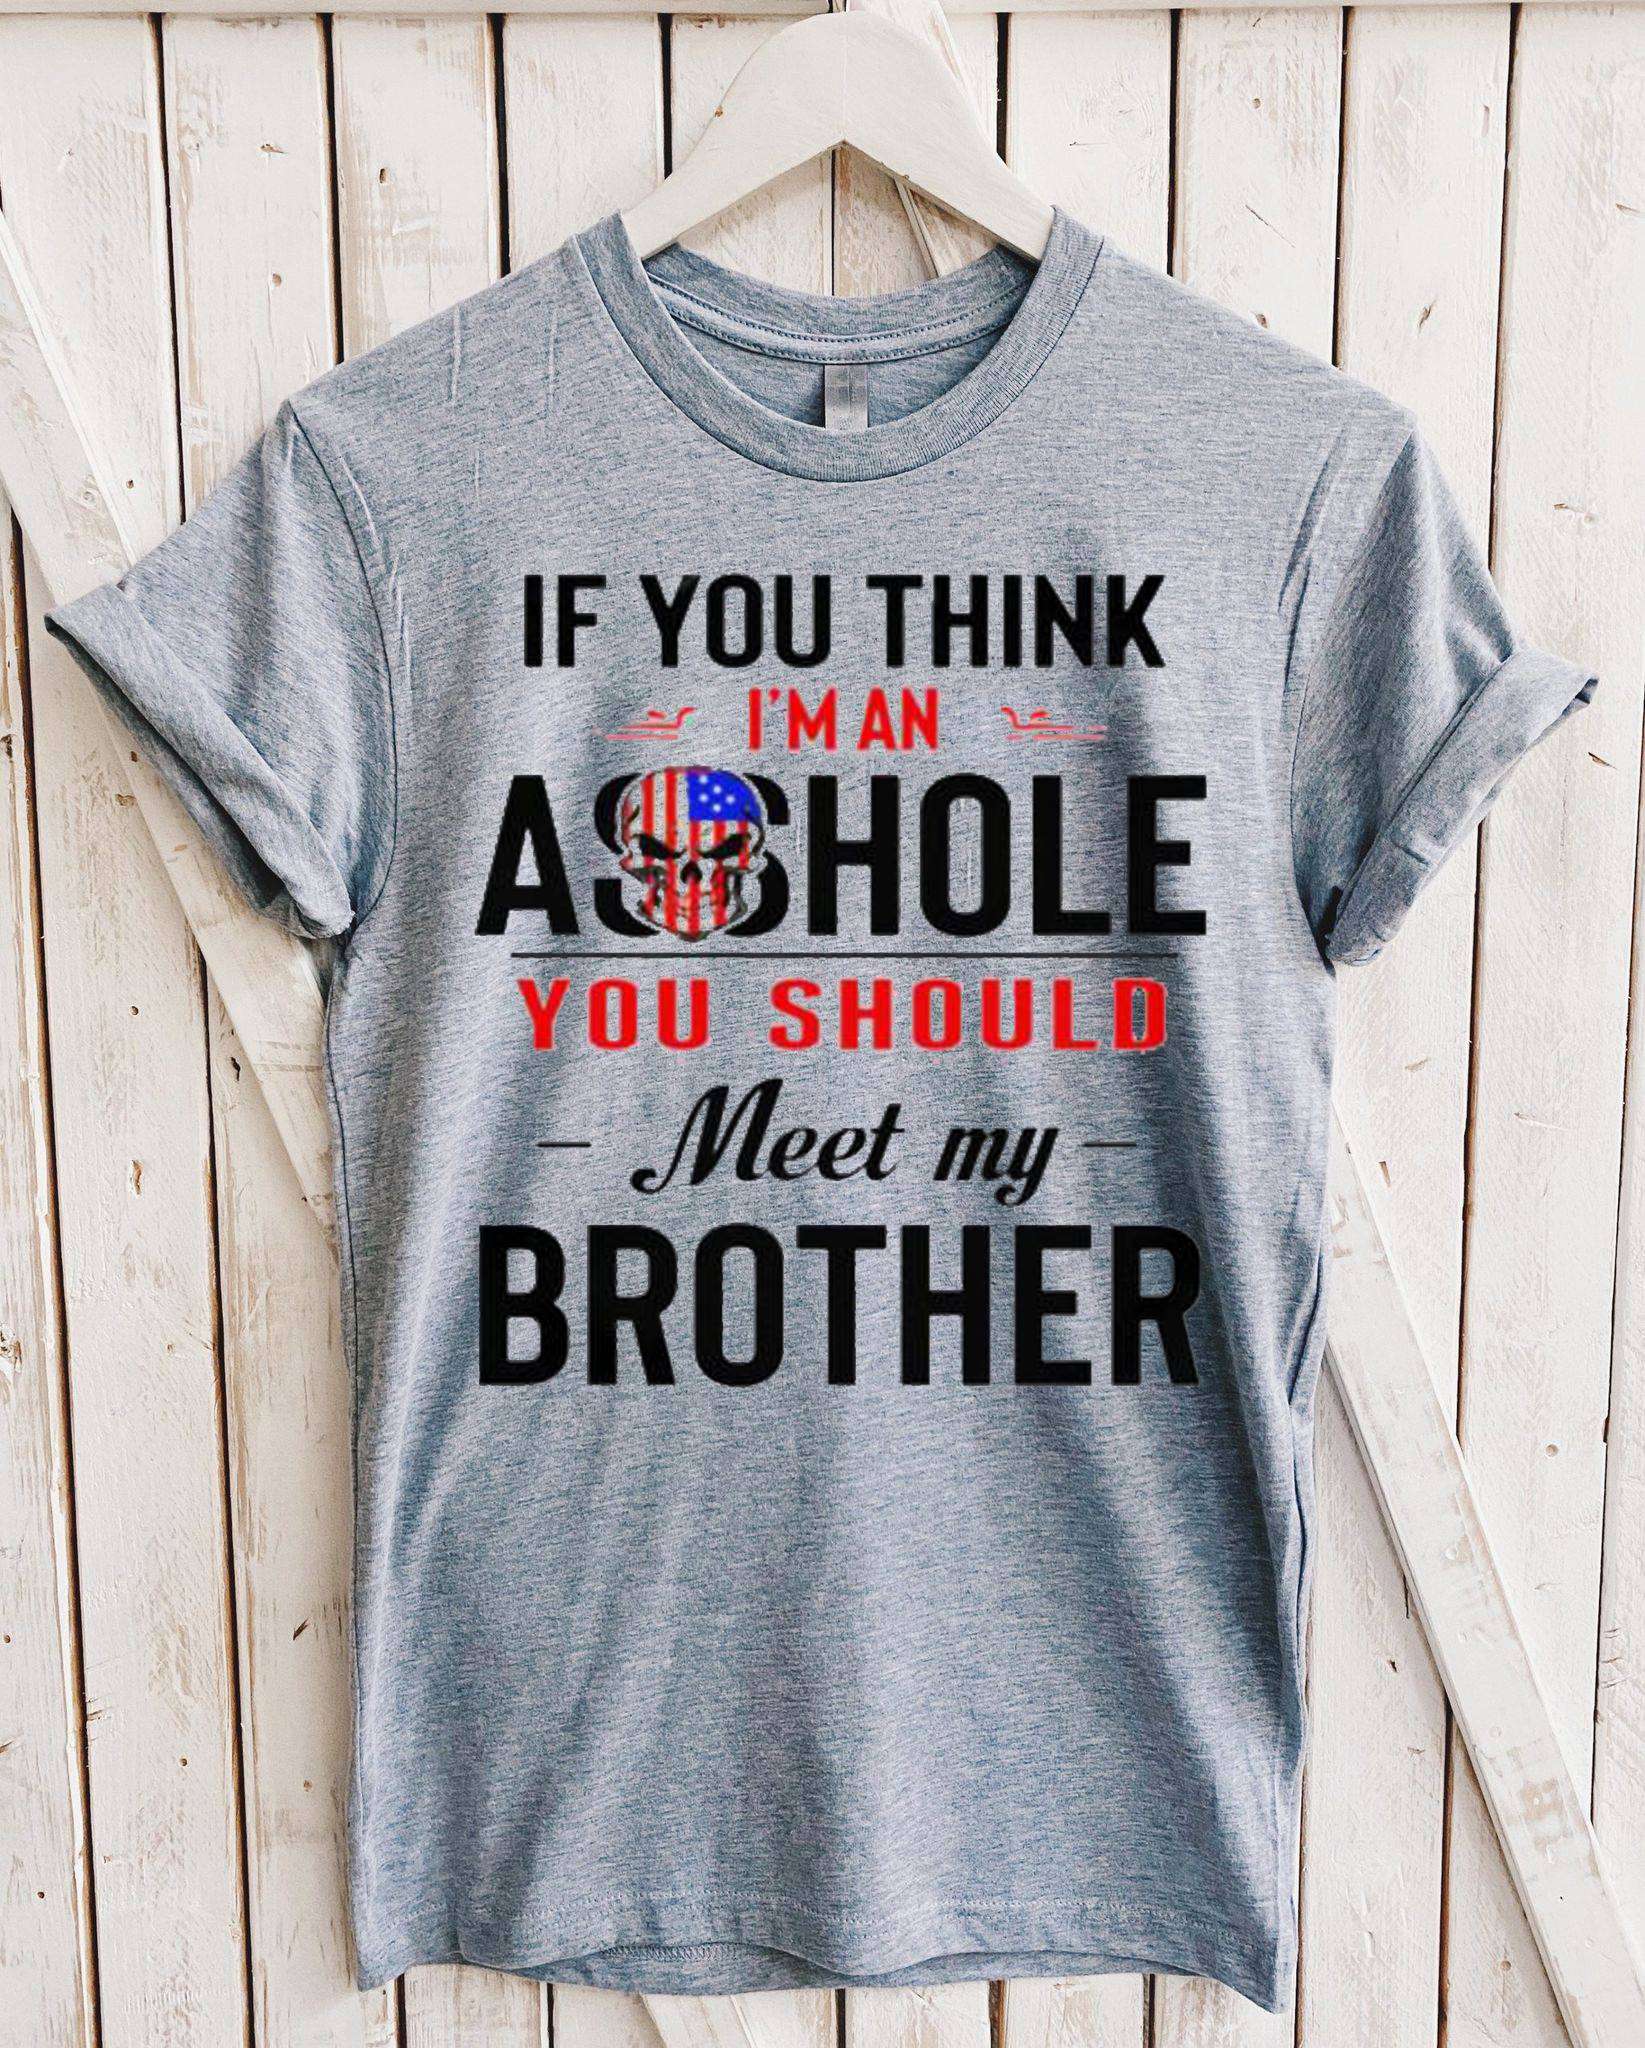 If you think i'm an asshole you should meet my brother